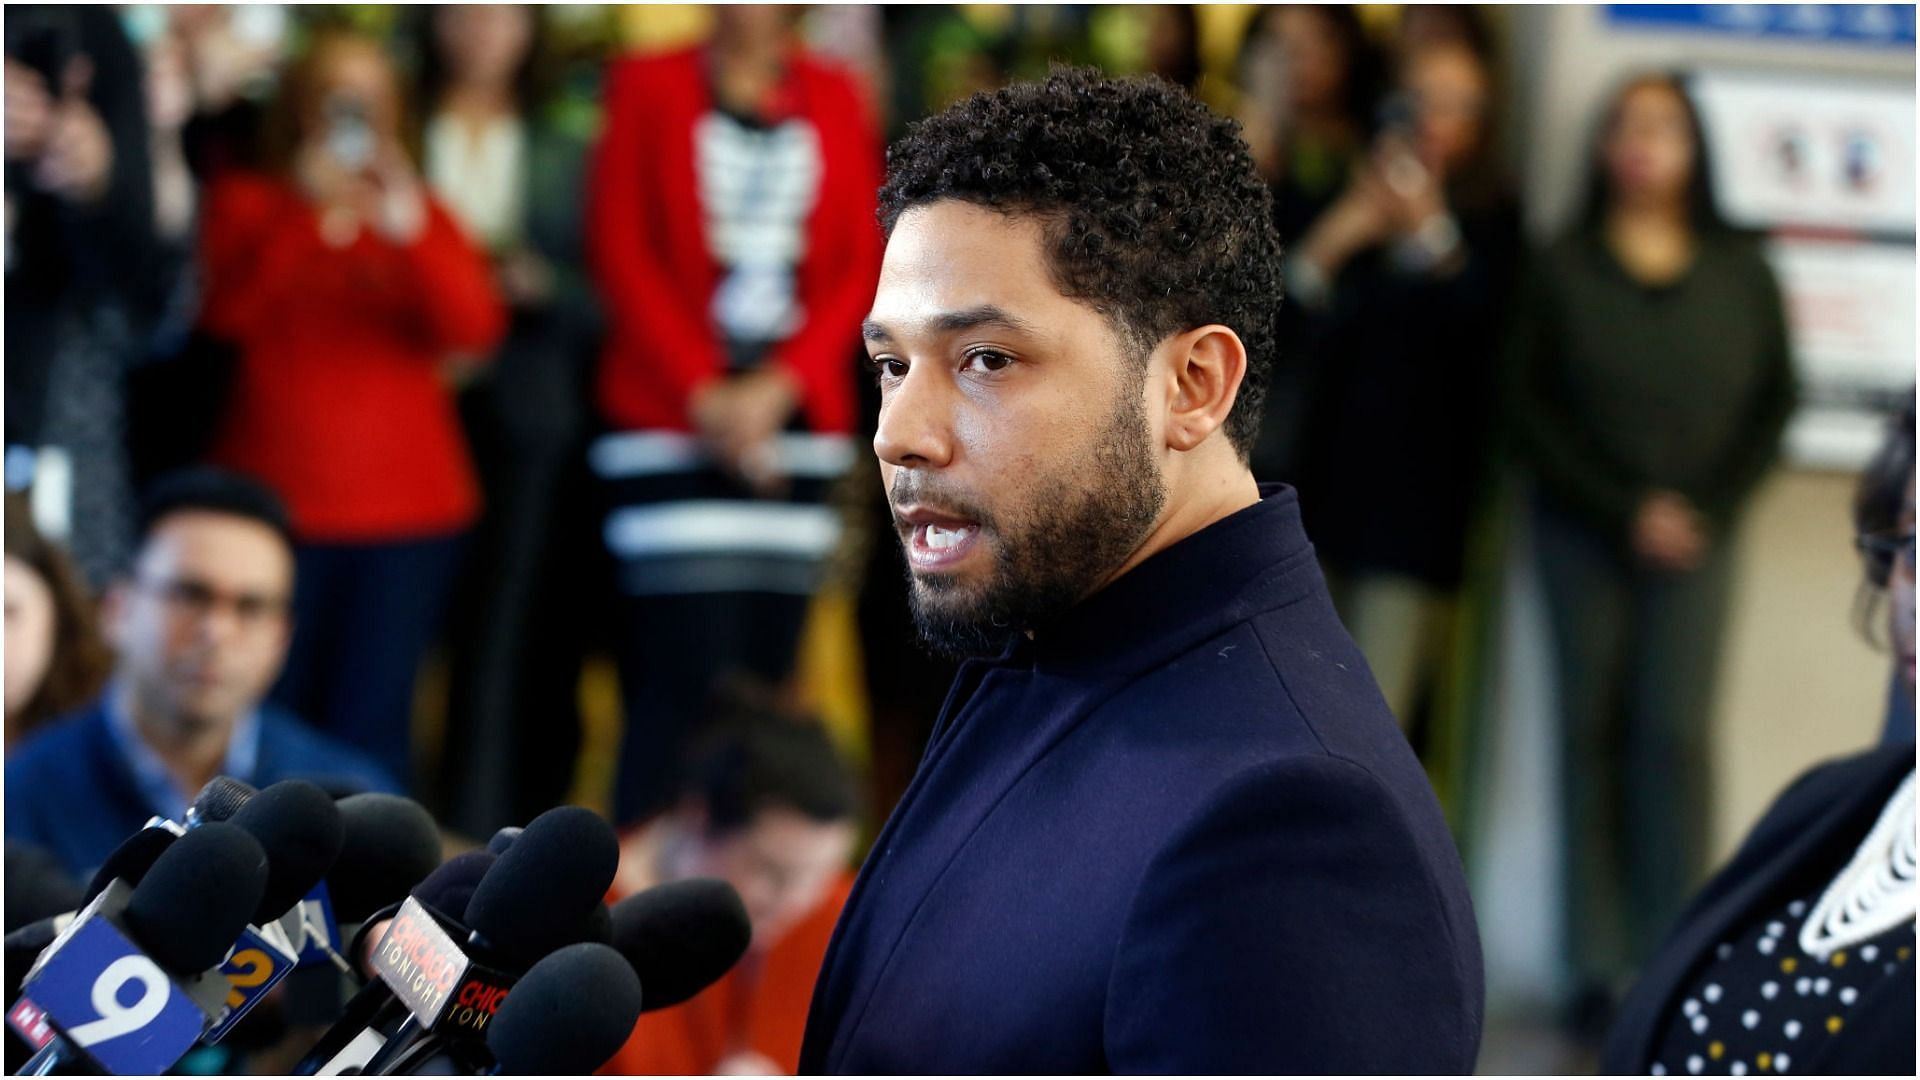 Jussie Smollett speaks with media after his appearance at Leighton Courthouse (Image by Nuccio DiNuzzo via Getty Images)